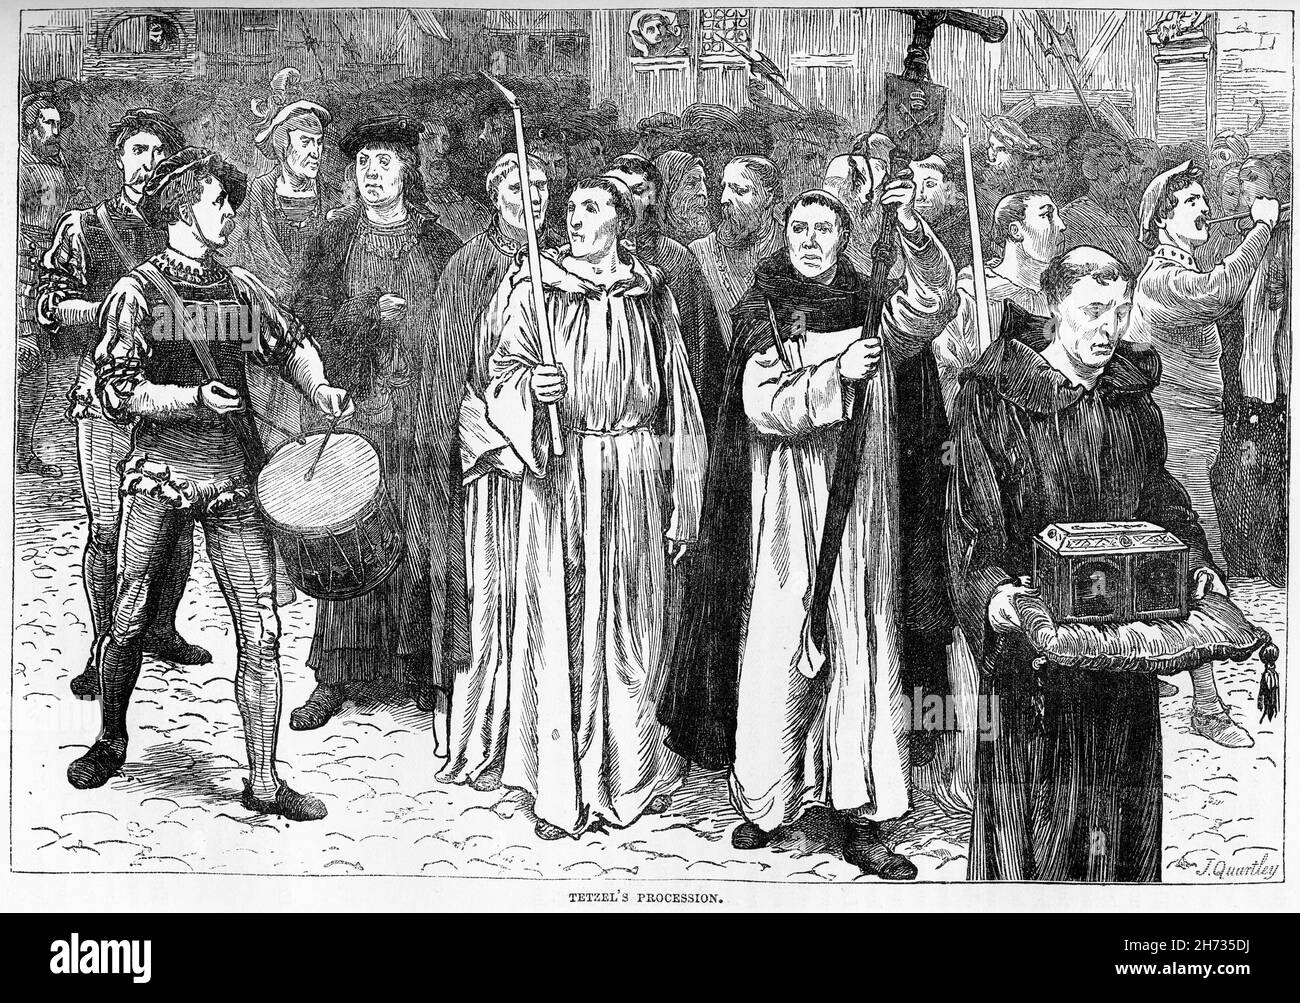 Engraving of Tetzel's procession as he comes into a town to sell indulgenses, one of the practices which sparked the Reformation Stock Photo